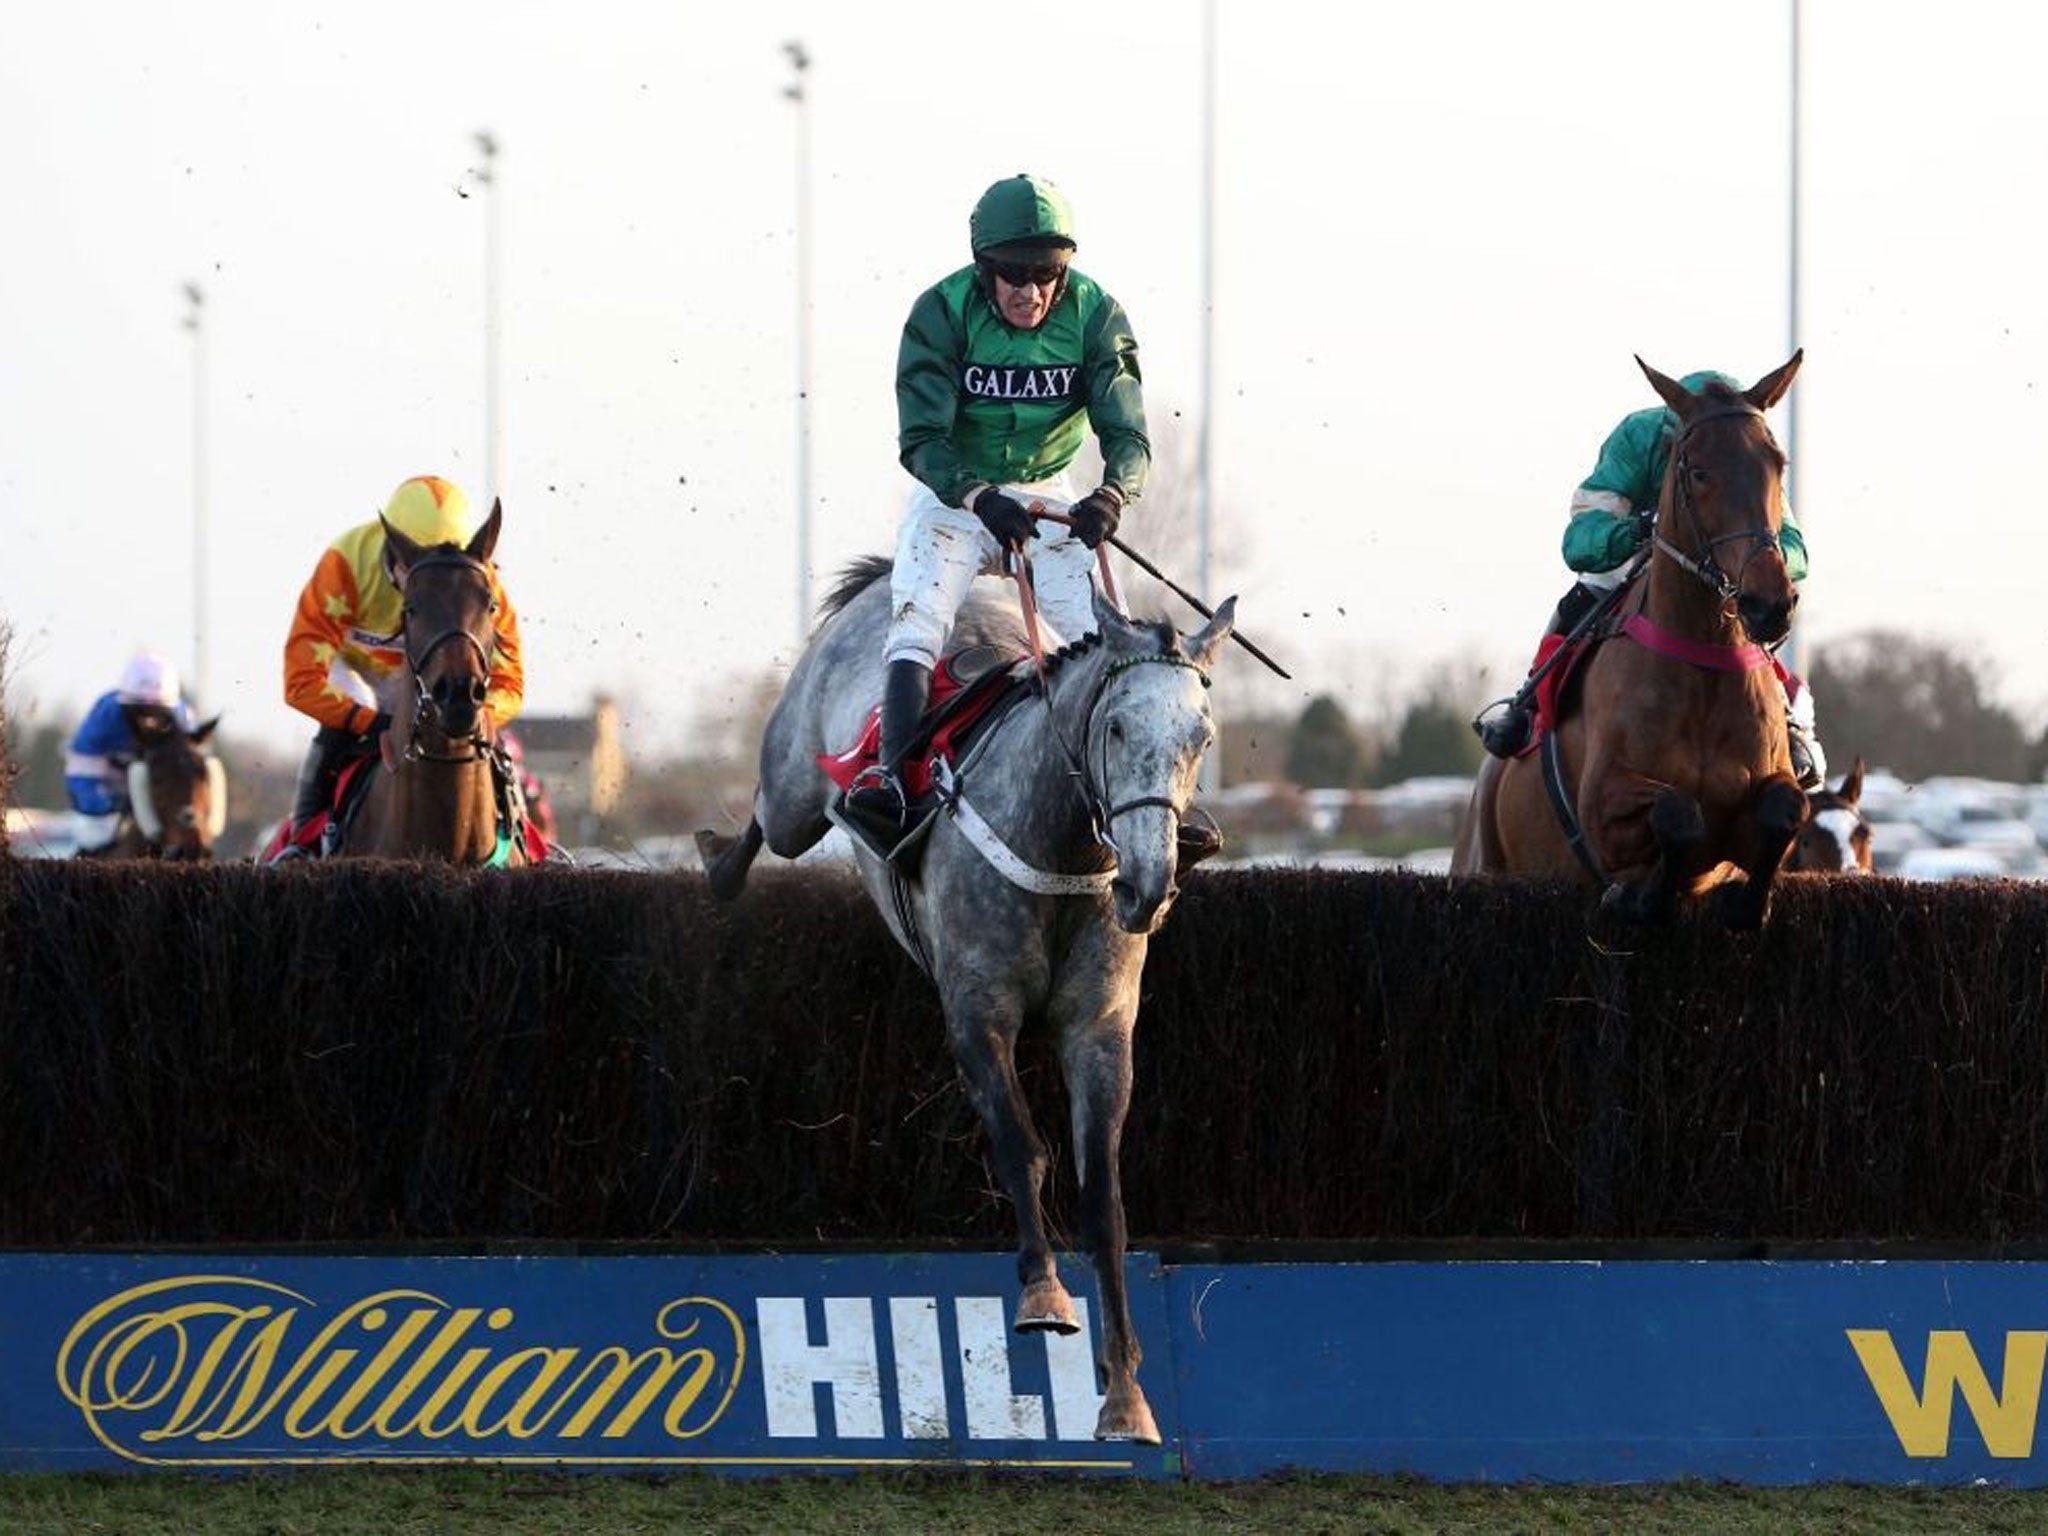 William Hill has been falling at its fences. Can its new chairman fix that?